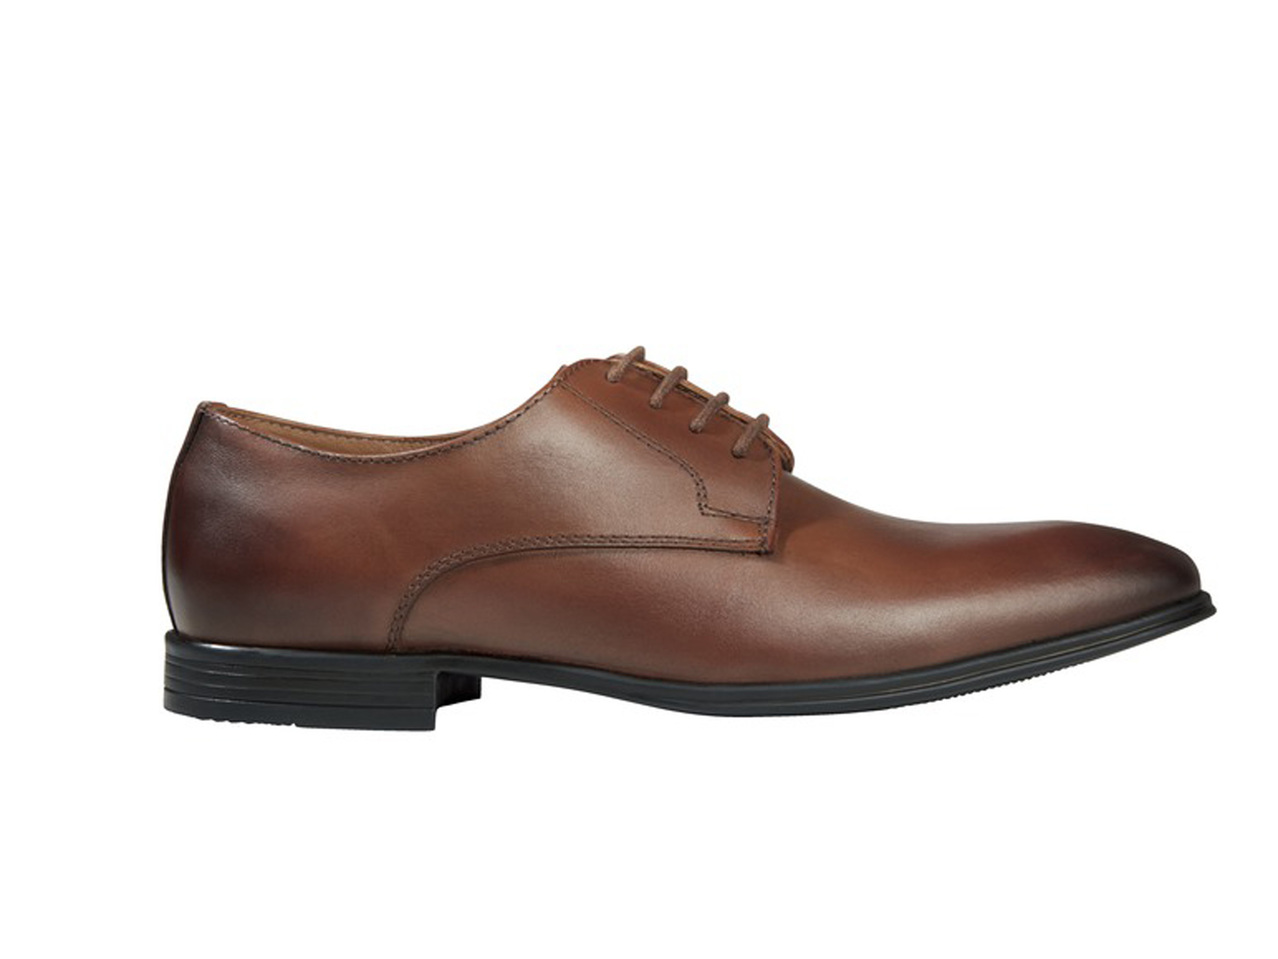 LIVERGY Men's Leather Business Shoes